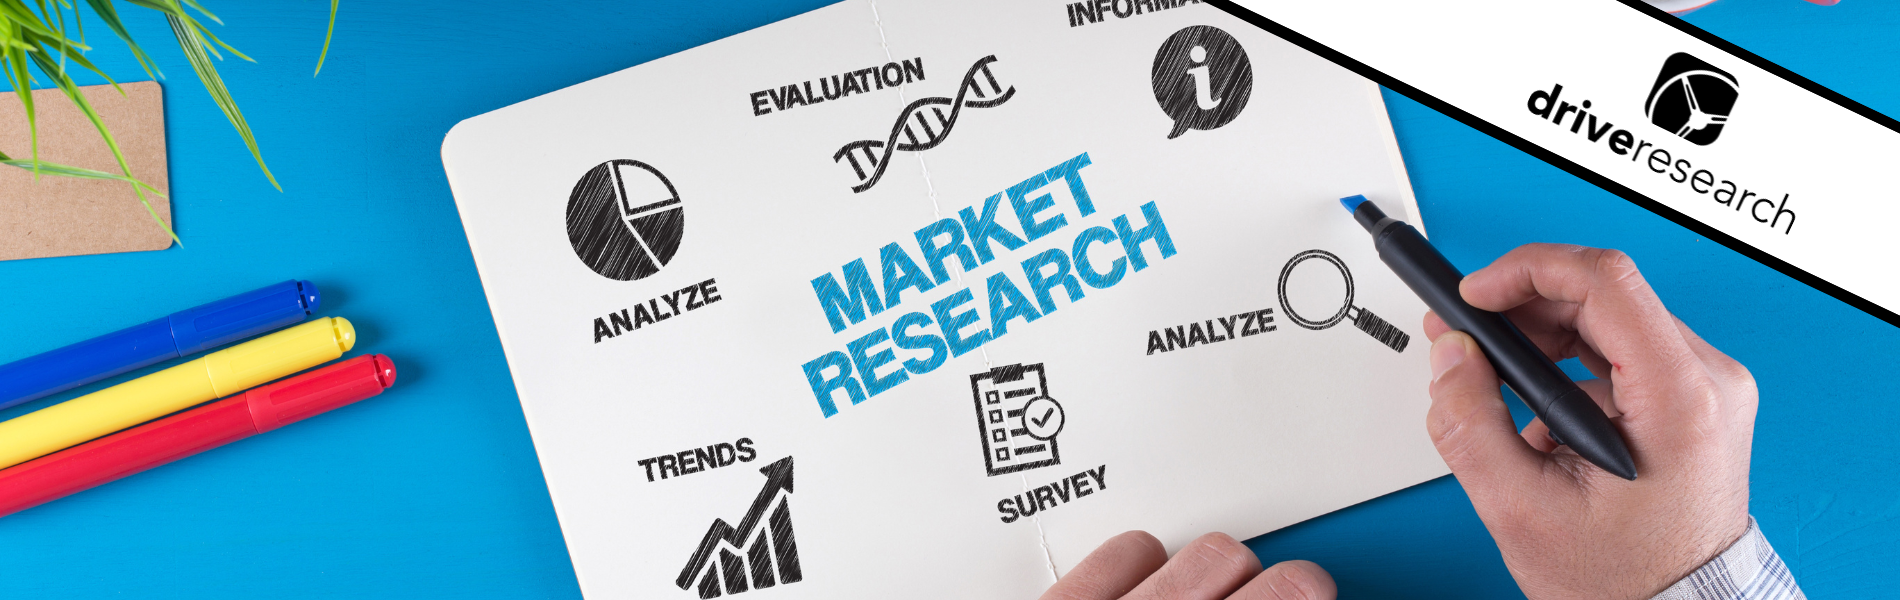 market research with keywords and concepts